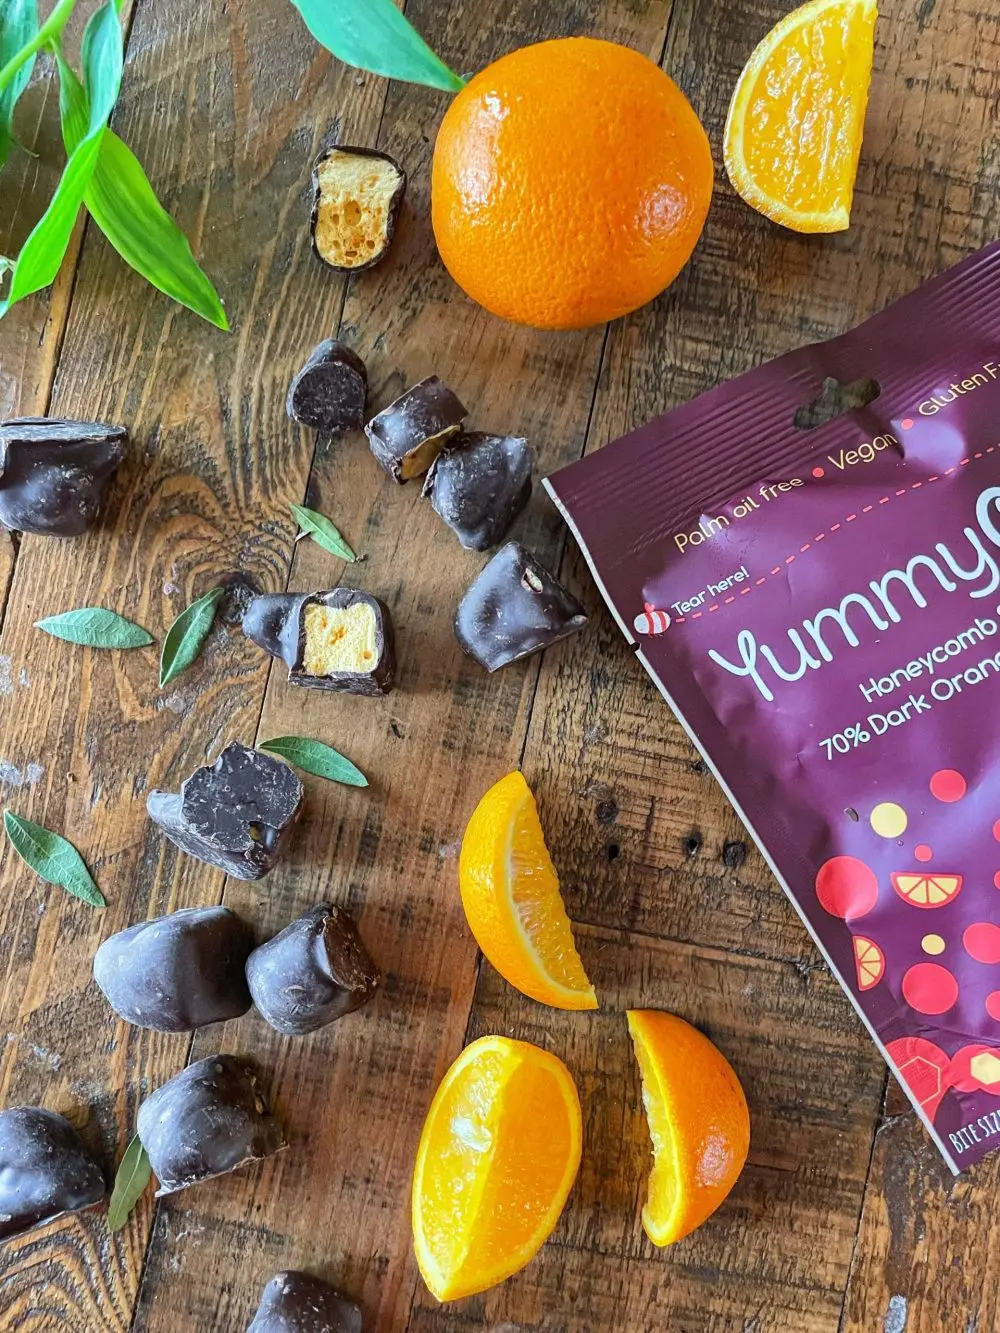 Dark Orange Belgian Chocolate Honeycomb Pouches 70% Dark Orange Belgian chocolate covered honeycomb sharing pouch bags 100g with natural flavours and palm oil free